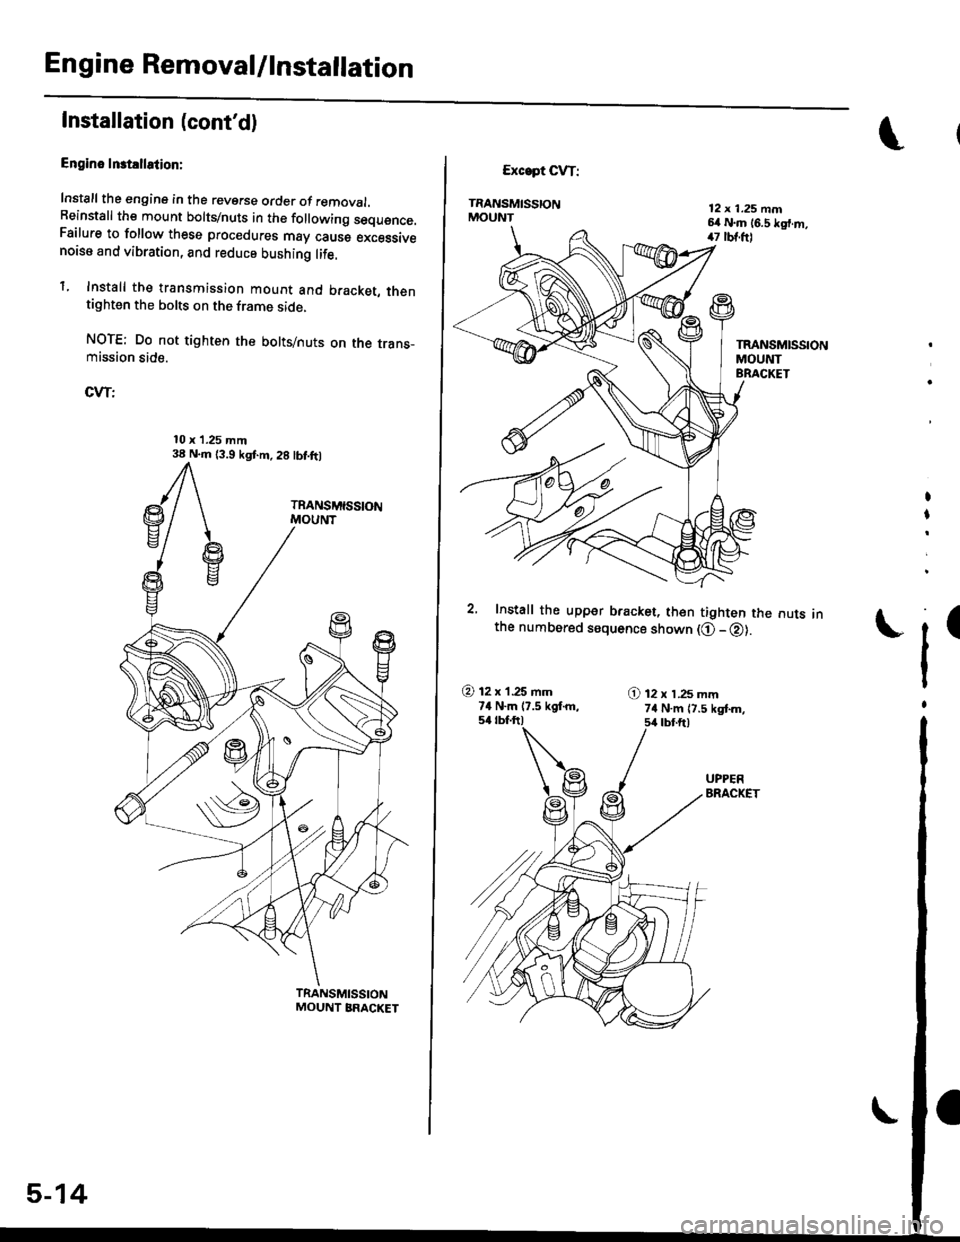 HONDA CIVIC 1997 6.G Repair Manual Engine Removal/lnstallation
Installation (contd)
Engino Inst!llation:
Install the engine in the reverse order of removal.Beinstall the mount bolts/nuts in the following sequence.Failure to follow the